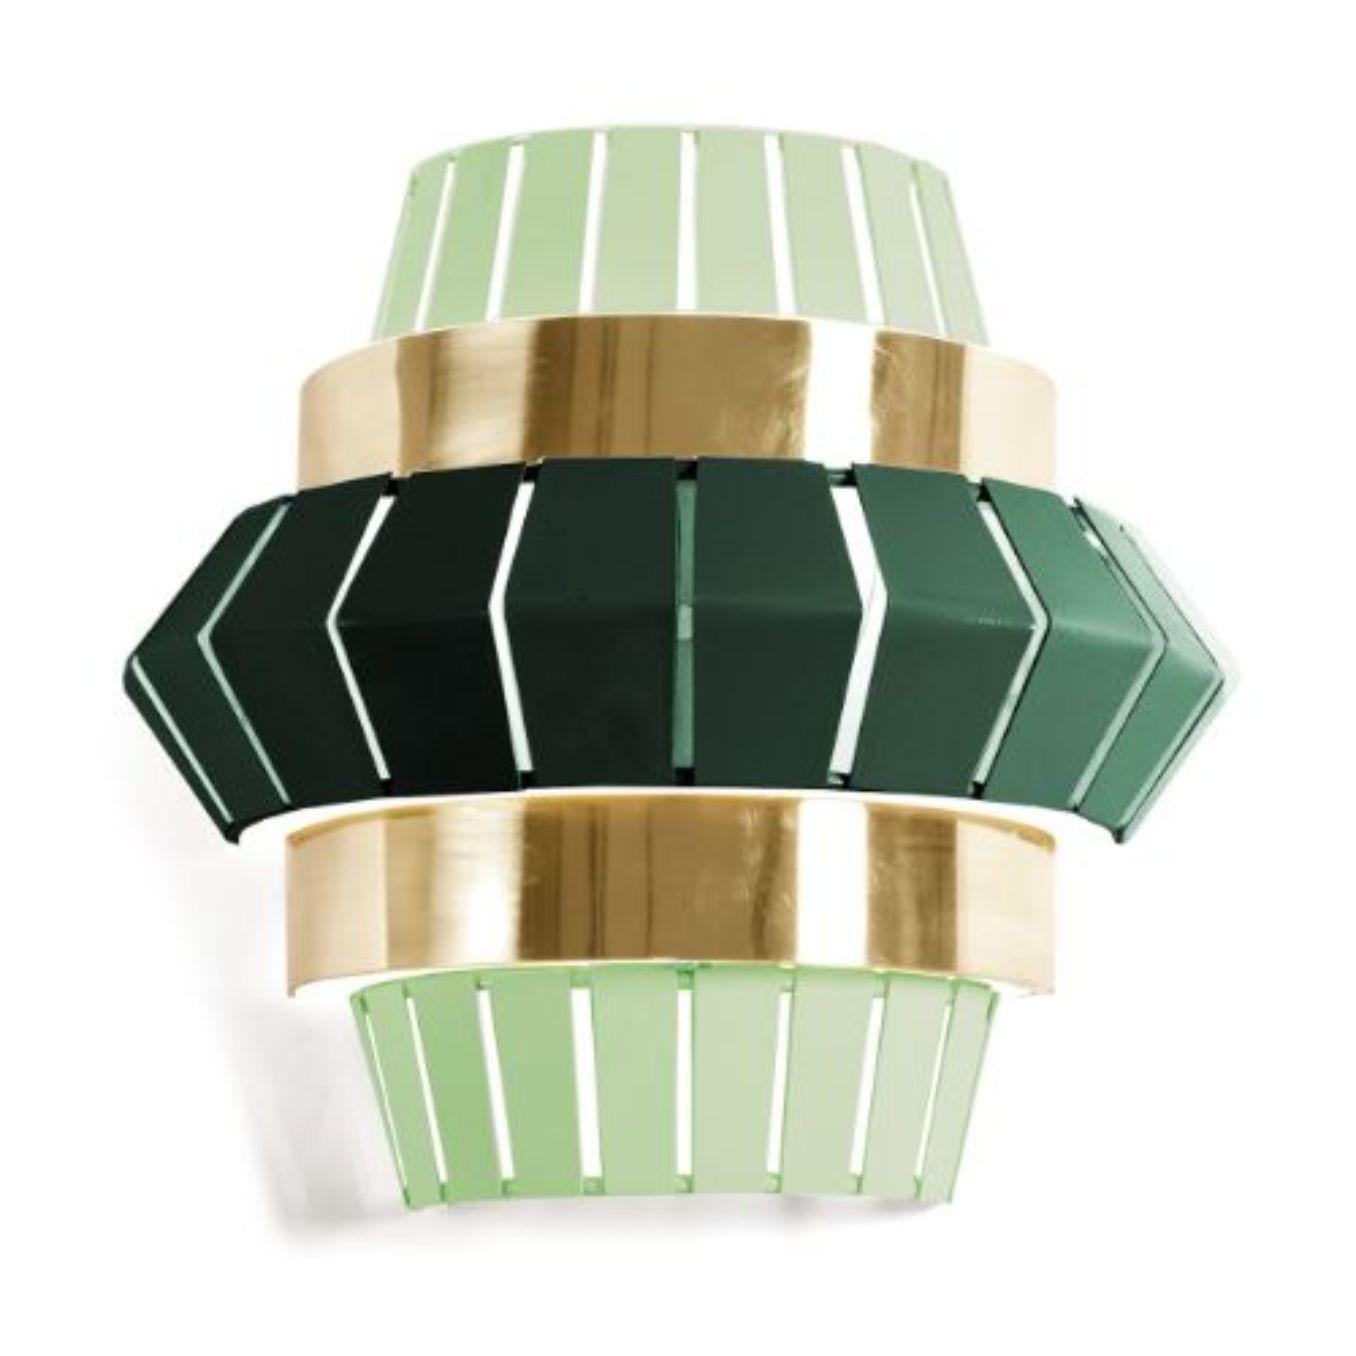 Dream and emerald comb wall lamp with brass ring by Dooq
Dimensions: W 37 x D 13 x H 34 cm
Materials: lacquered metal, polished brass.
Also available in different colors and materials.

Information:
230V/50Hz
E14/1x20W LED
120V/60Hz
E12/1x15W